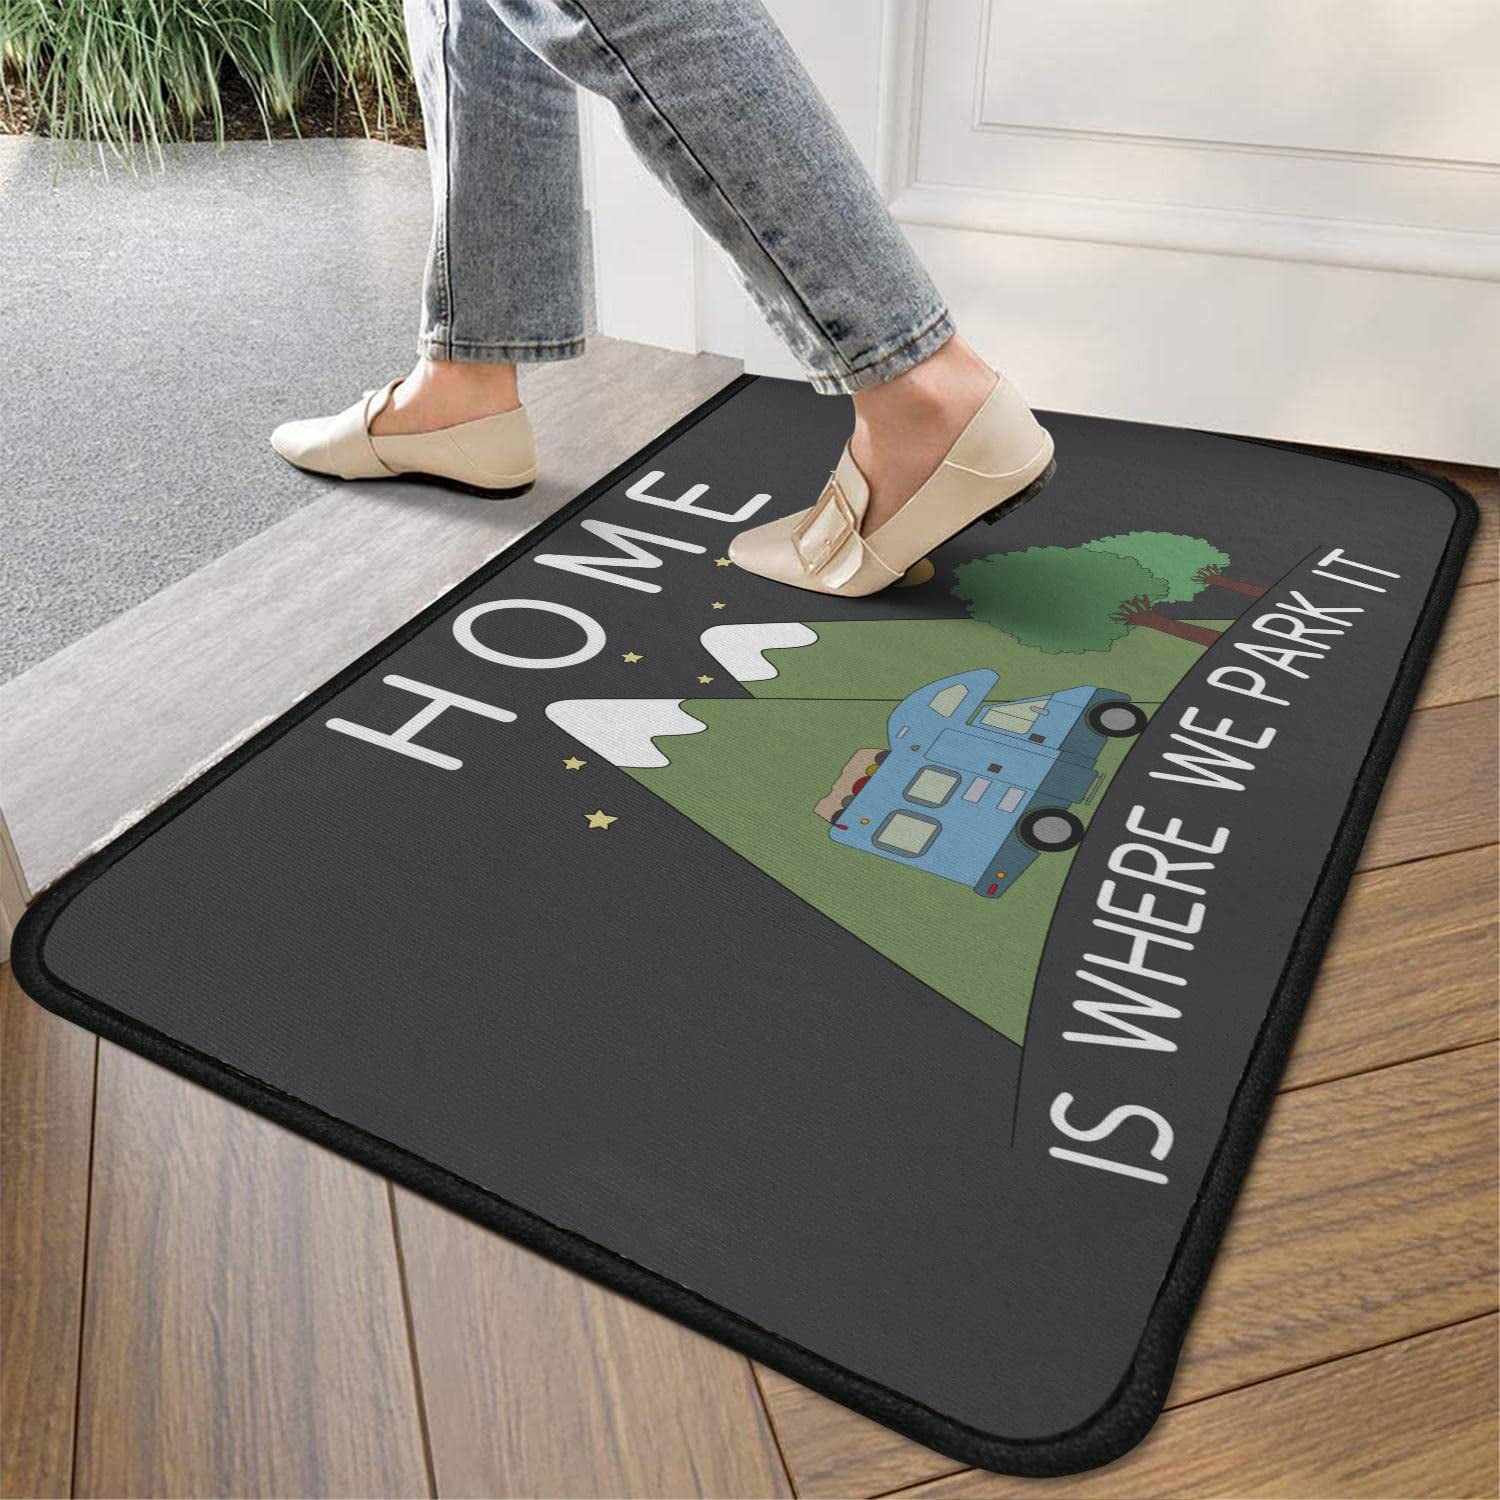  Personalized Camper Welcome Rugs,Custom Camping Door mat with  Family Name,Customized Camper Rug,Camper Accessories Sign Decorations for RV  Trailer Motorhomes Inside Outside Indoor Outdoor,30X18 in : Automotive